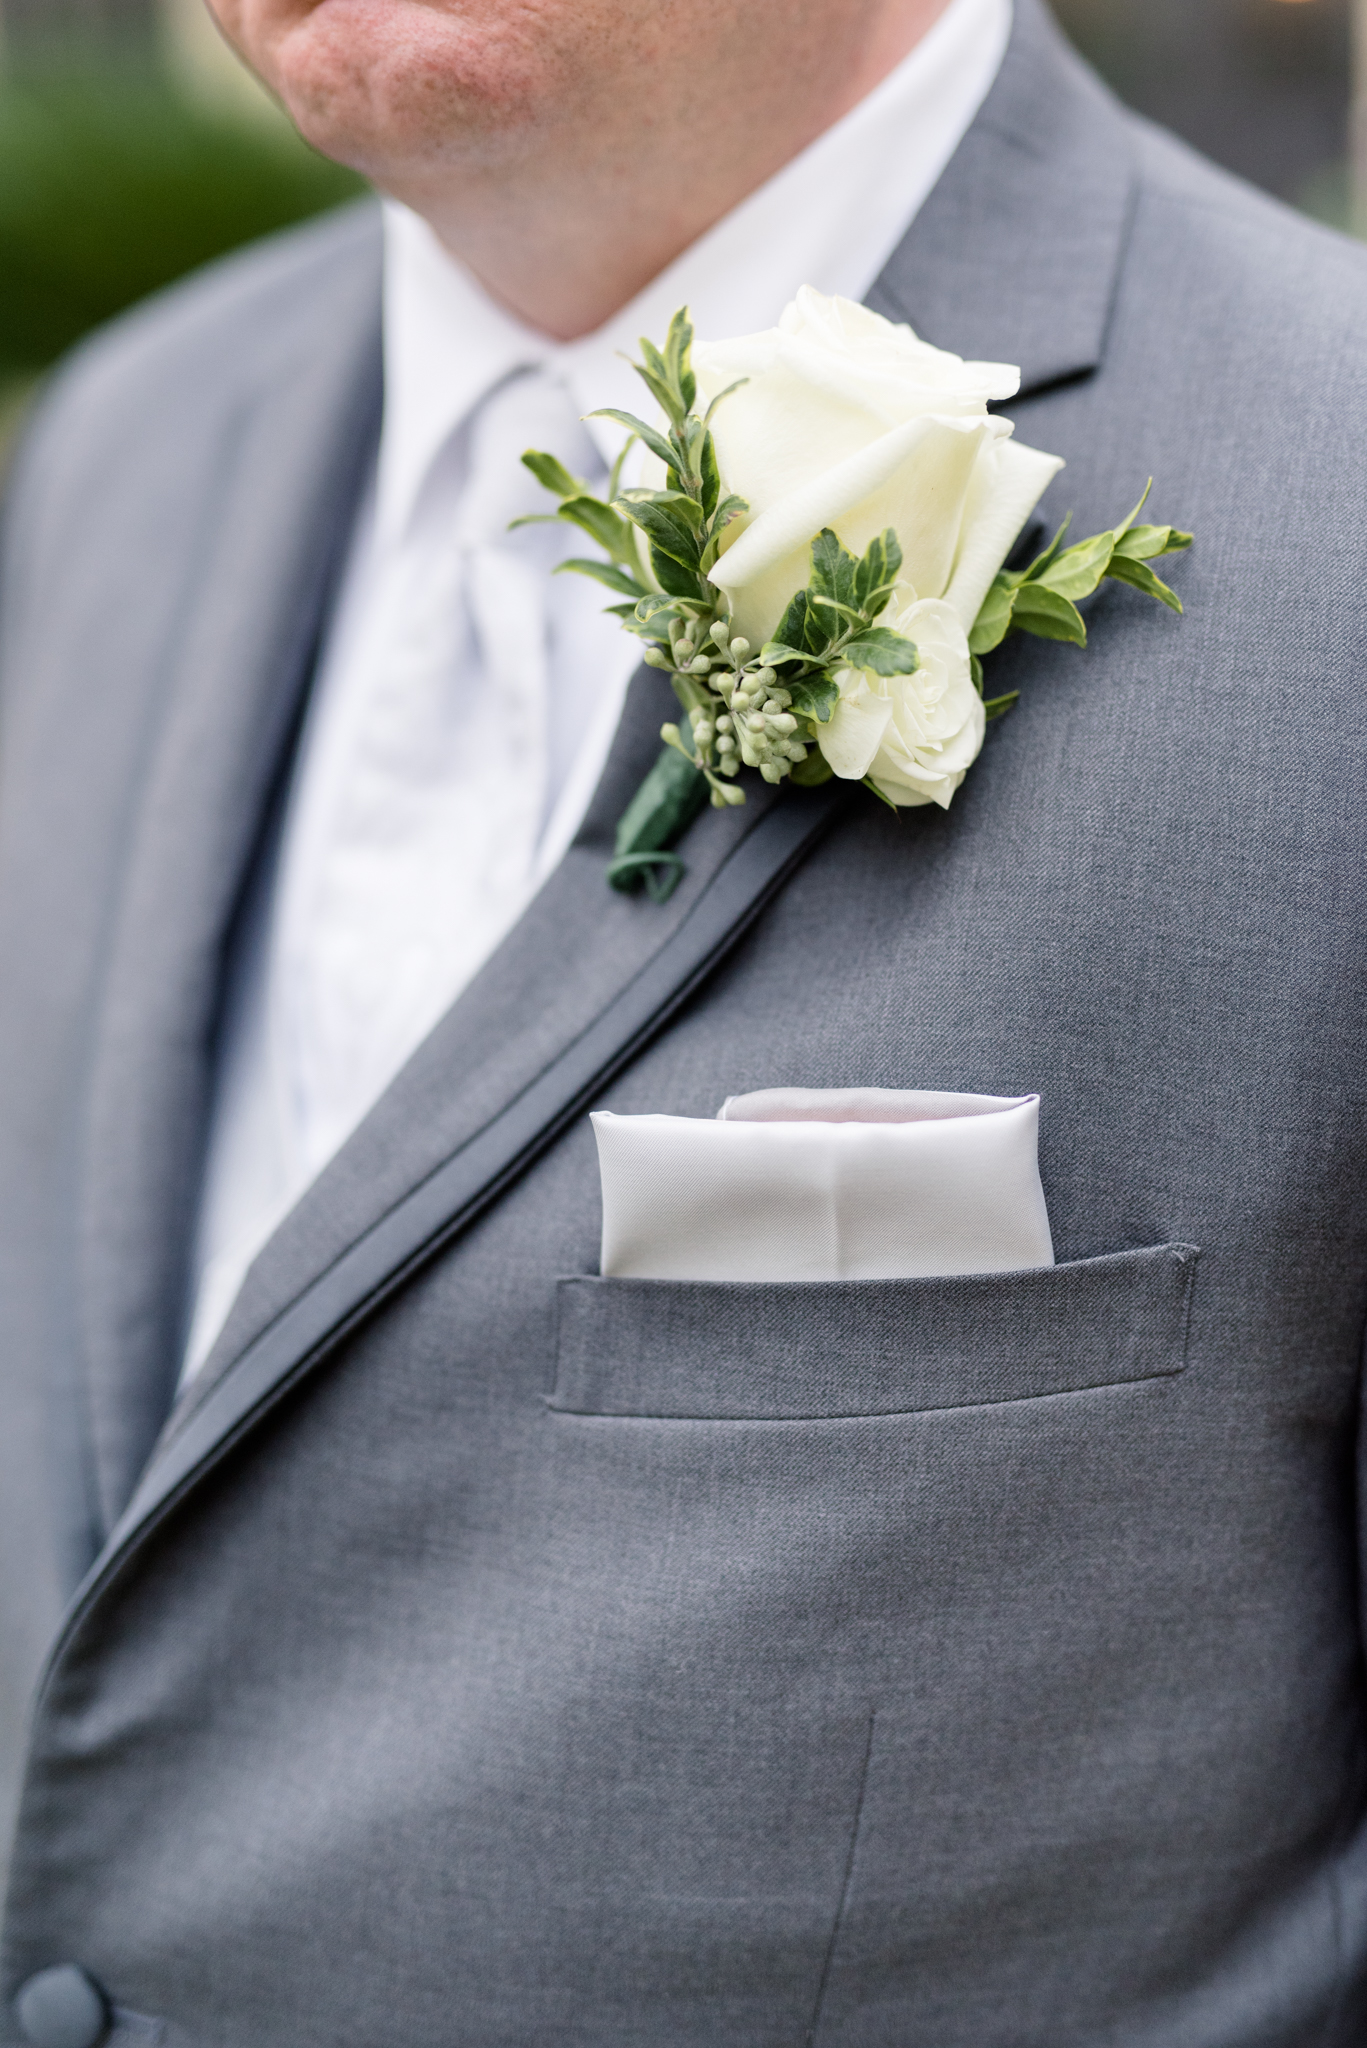 Groom's boutonniere and wedding attire.